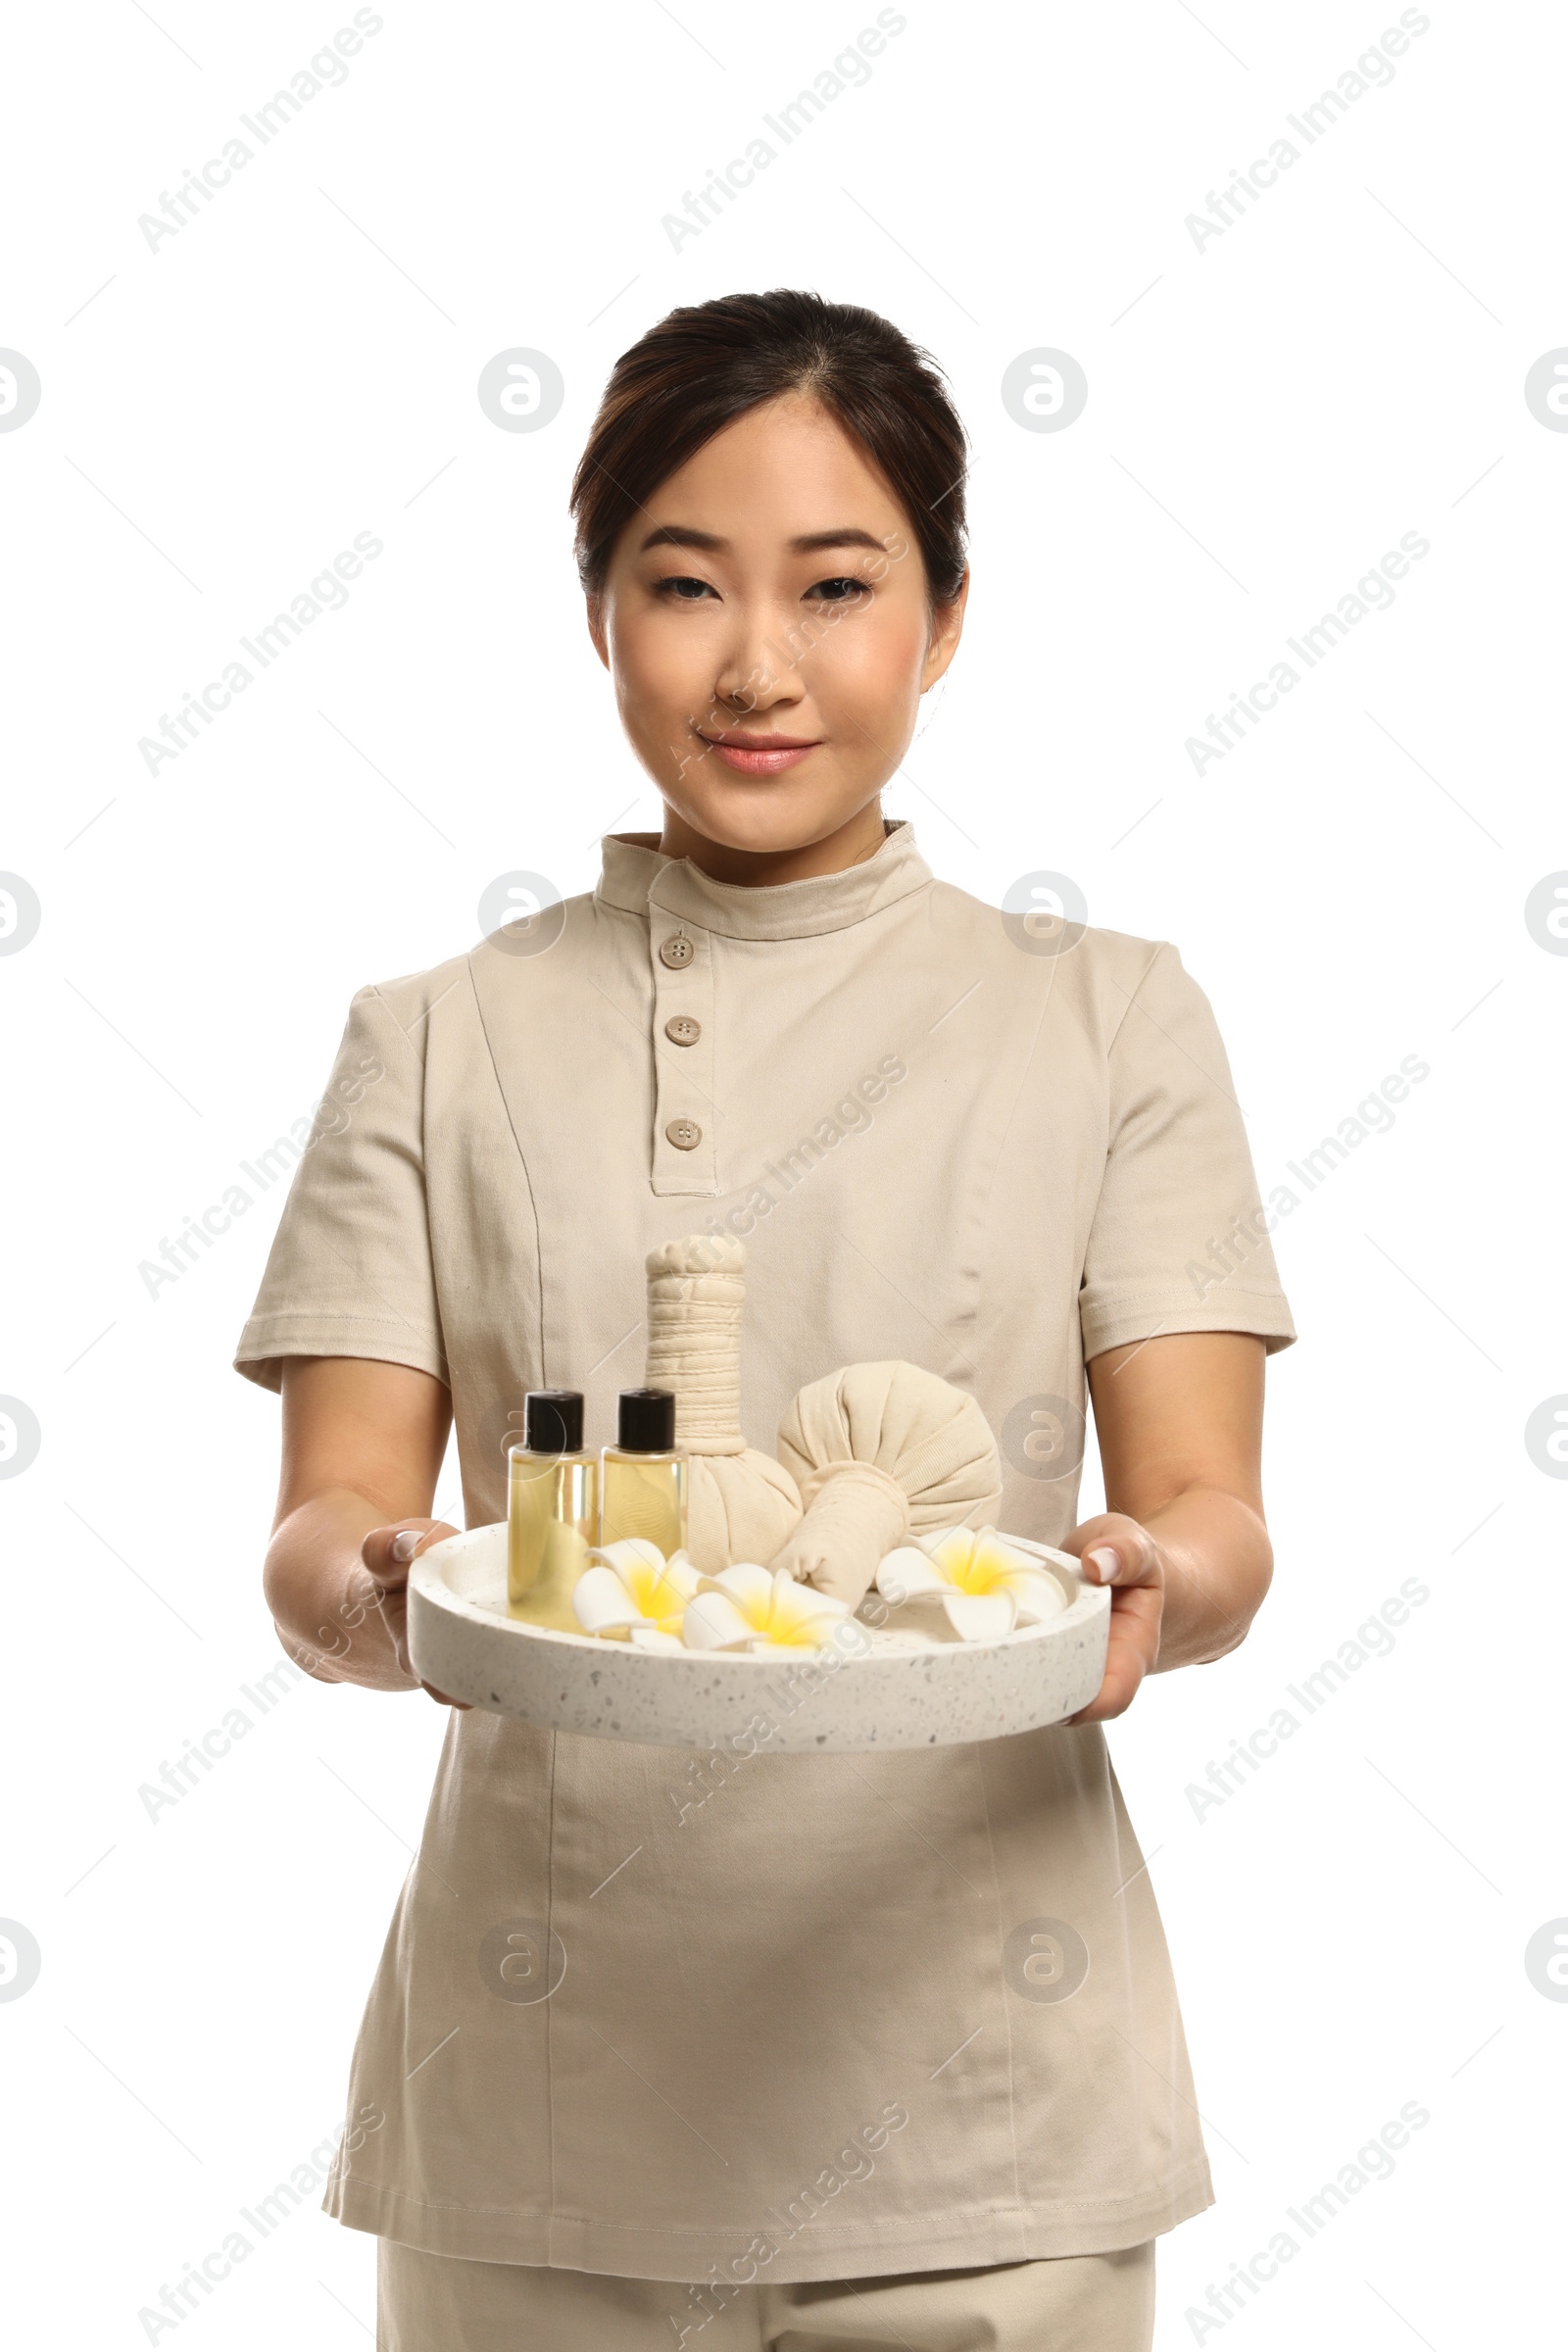 Photo of Professional masseuse in uniform holding tray with spa supplies on white background